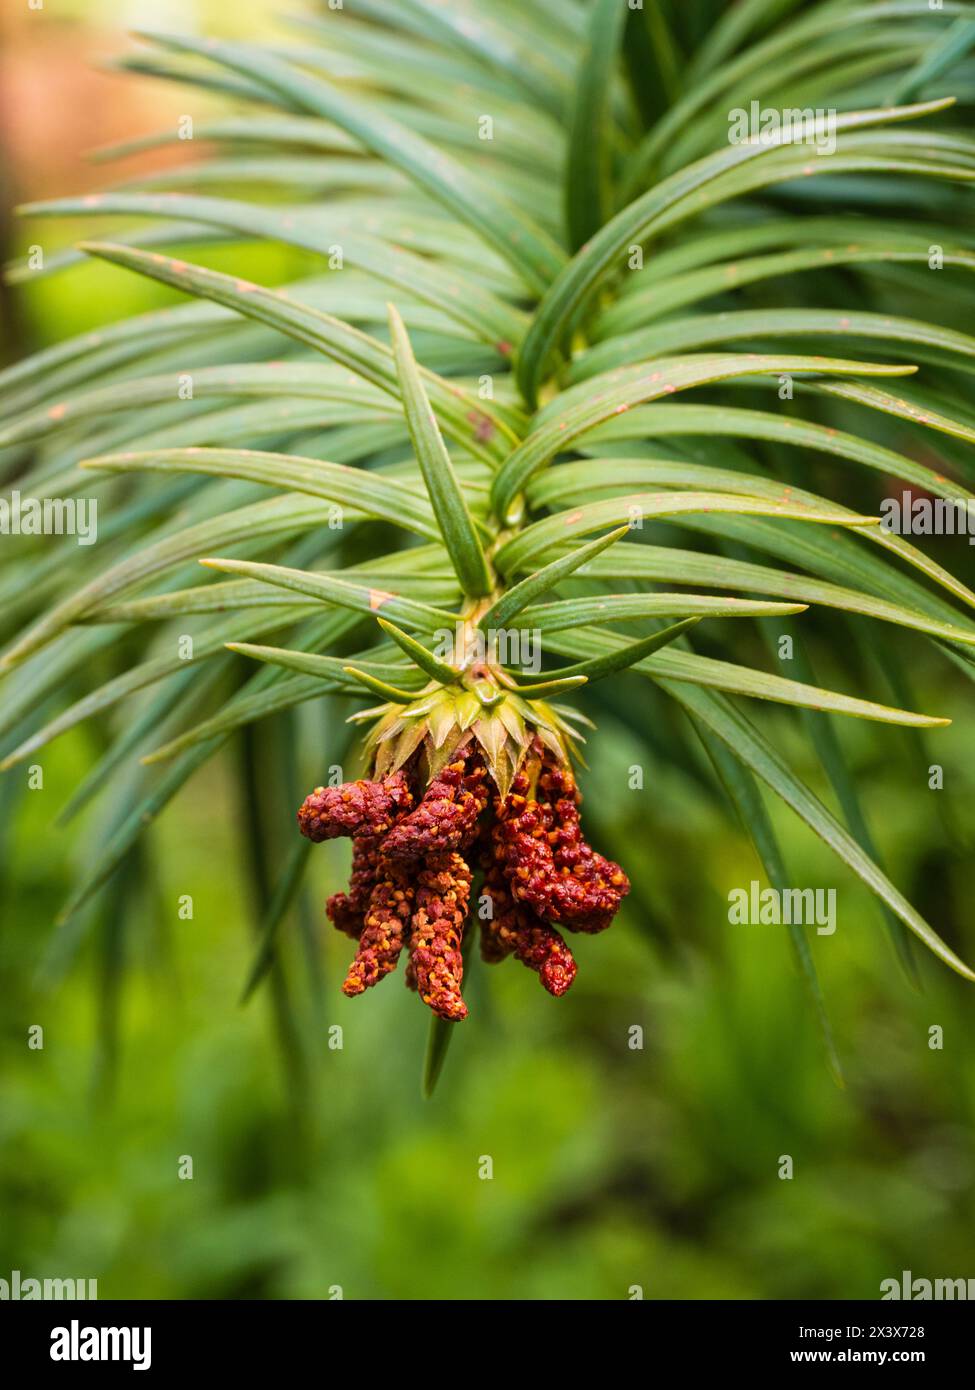 Male, pollen cones of the hardy evergreen Chinese fir tree, Cunninghamia lanceolata Stock Photo